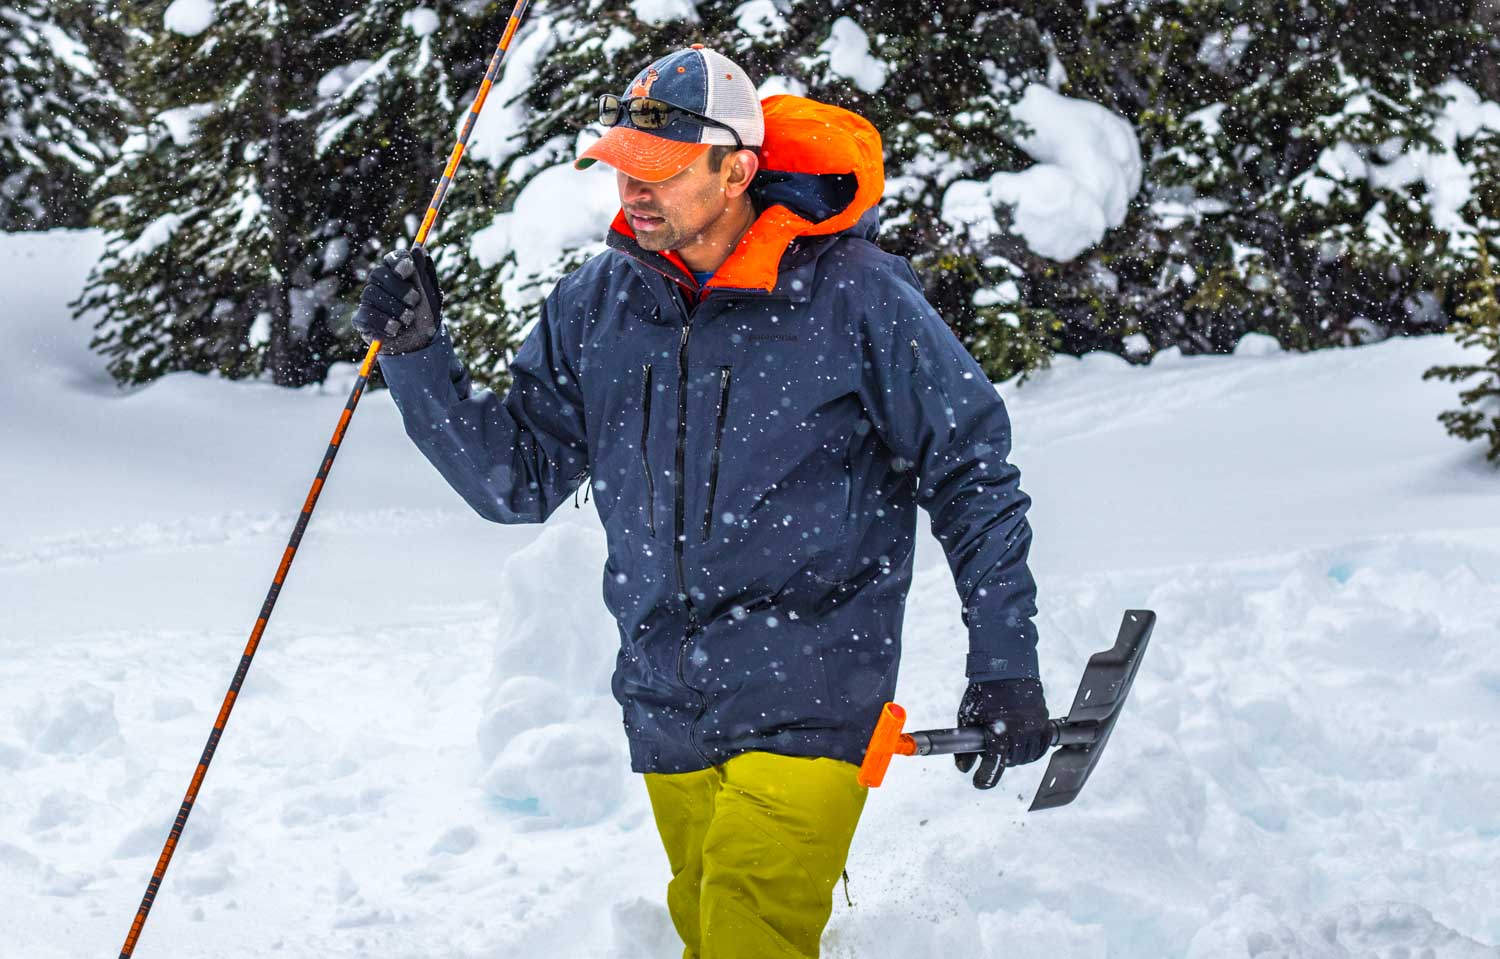 Top 3 Ski Items for Extreme Weather Conditions